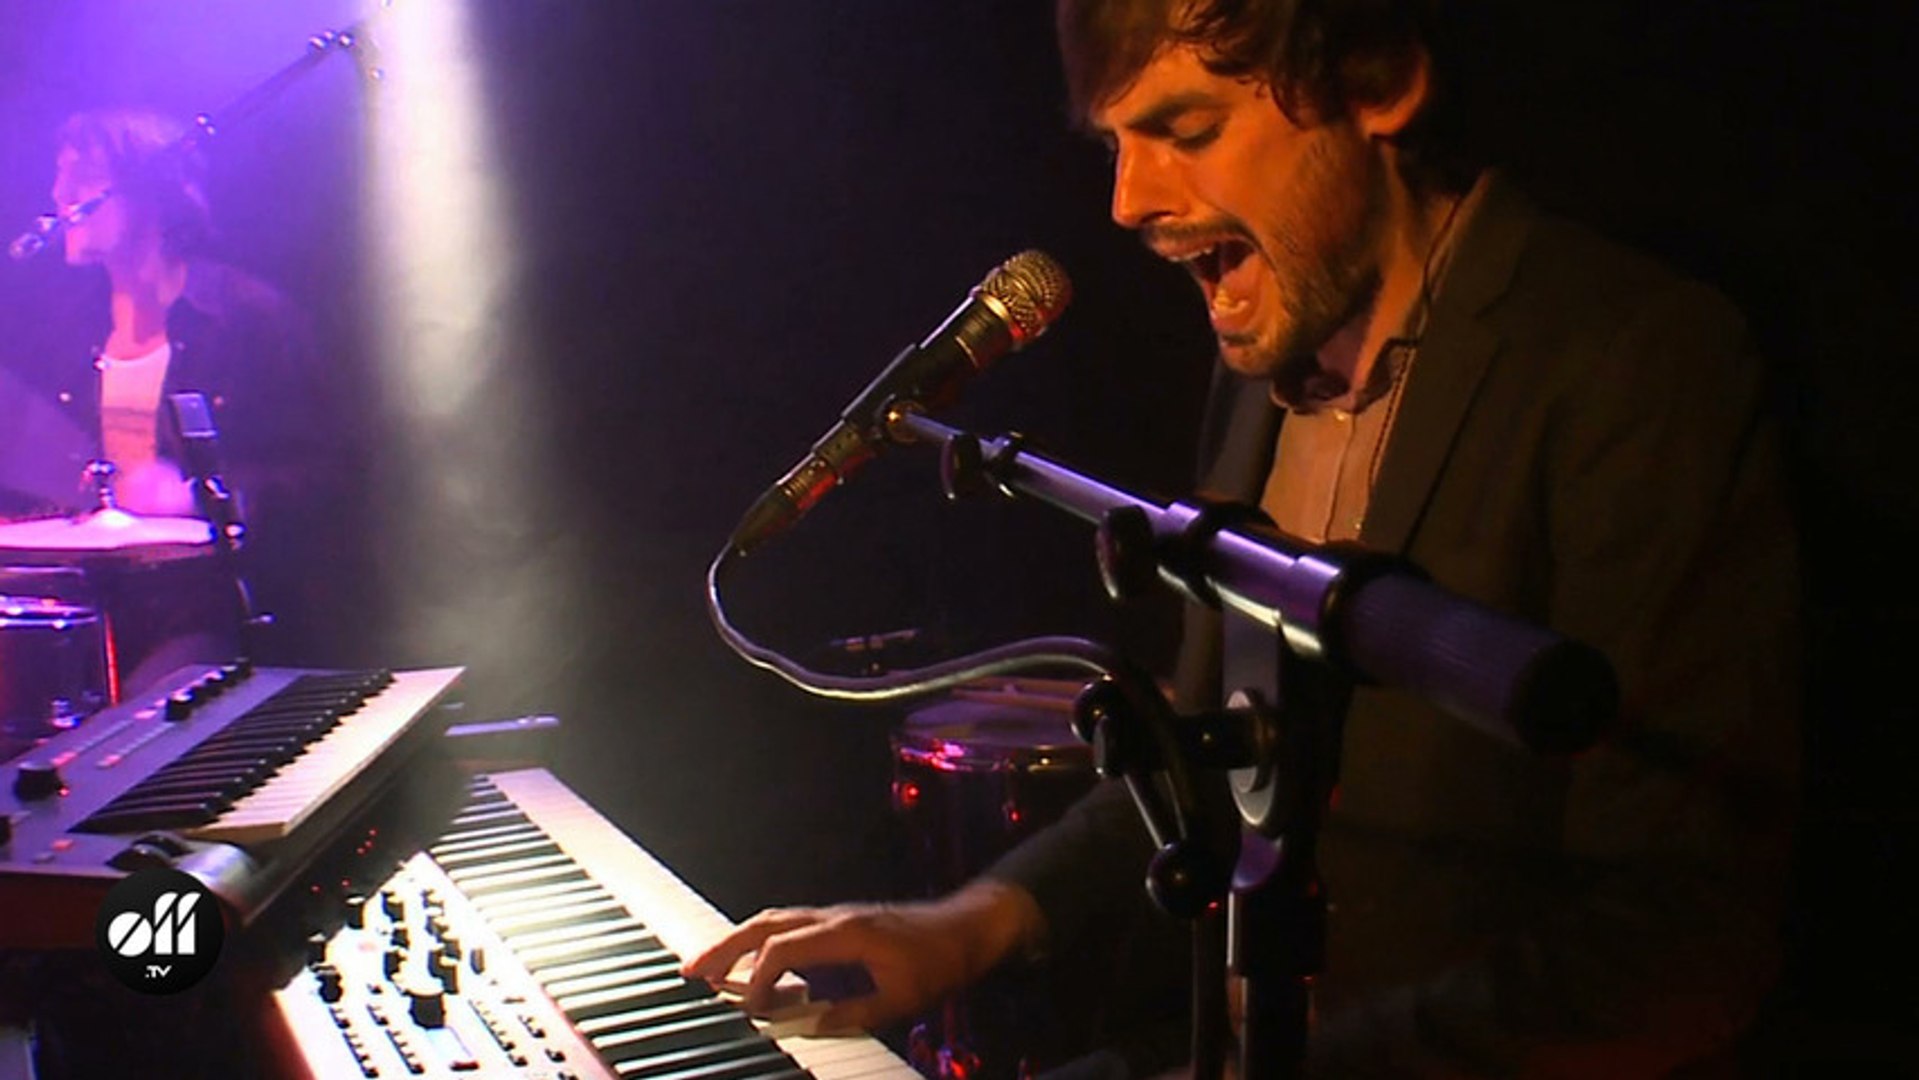 OFF LIVE - Puggy "When You Know" (8/13) - Vidéo Dailymotion